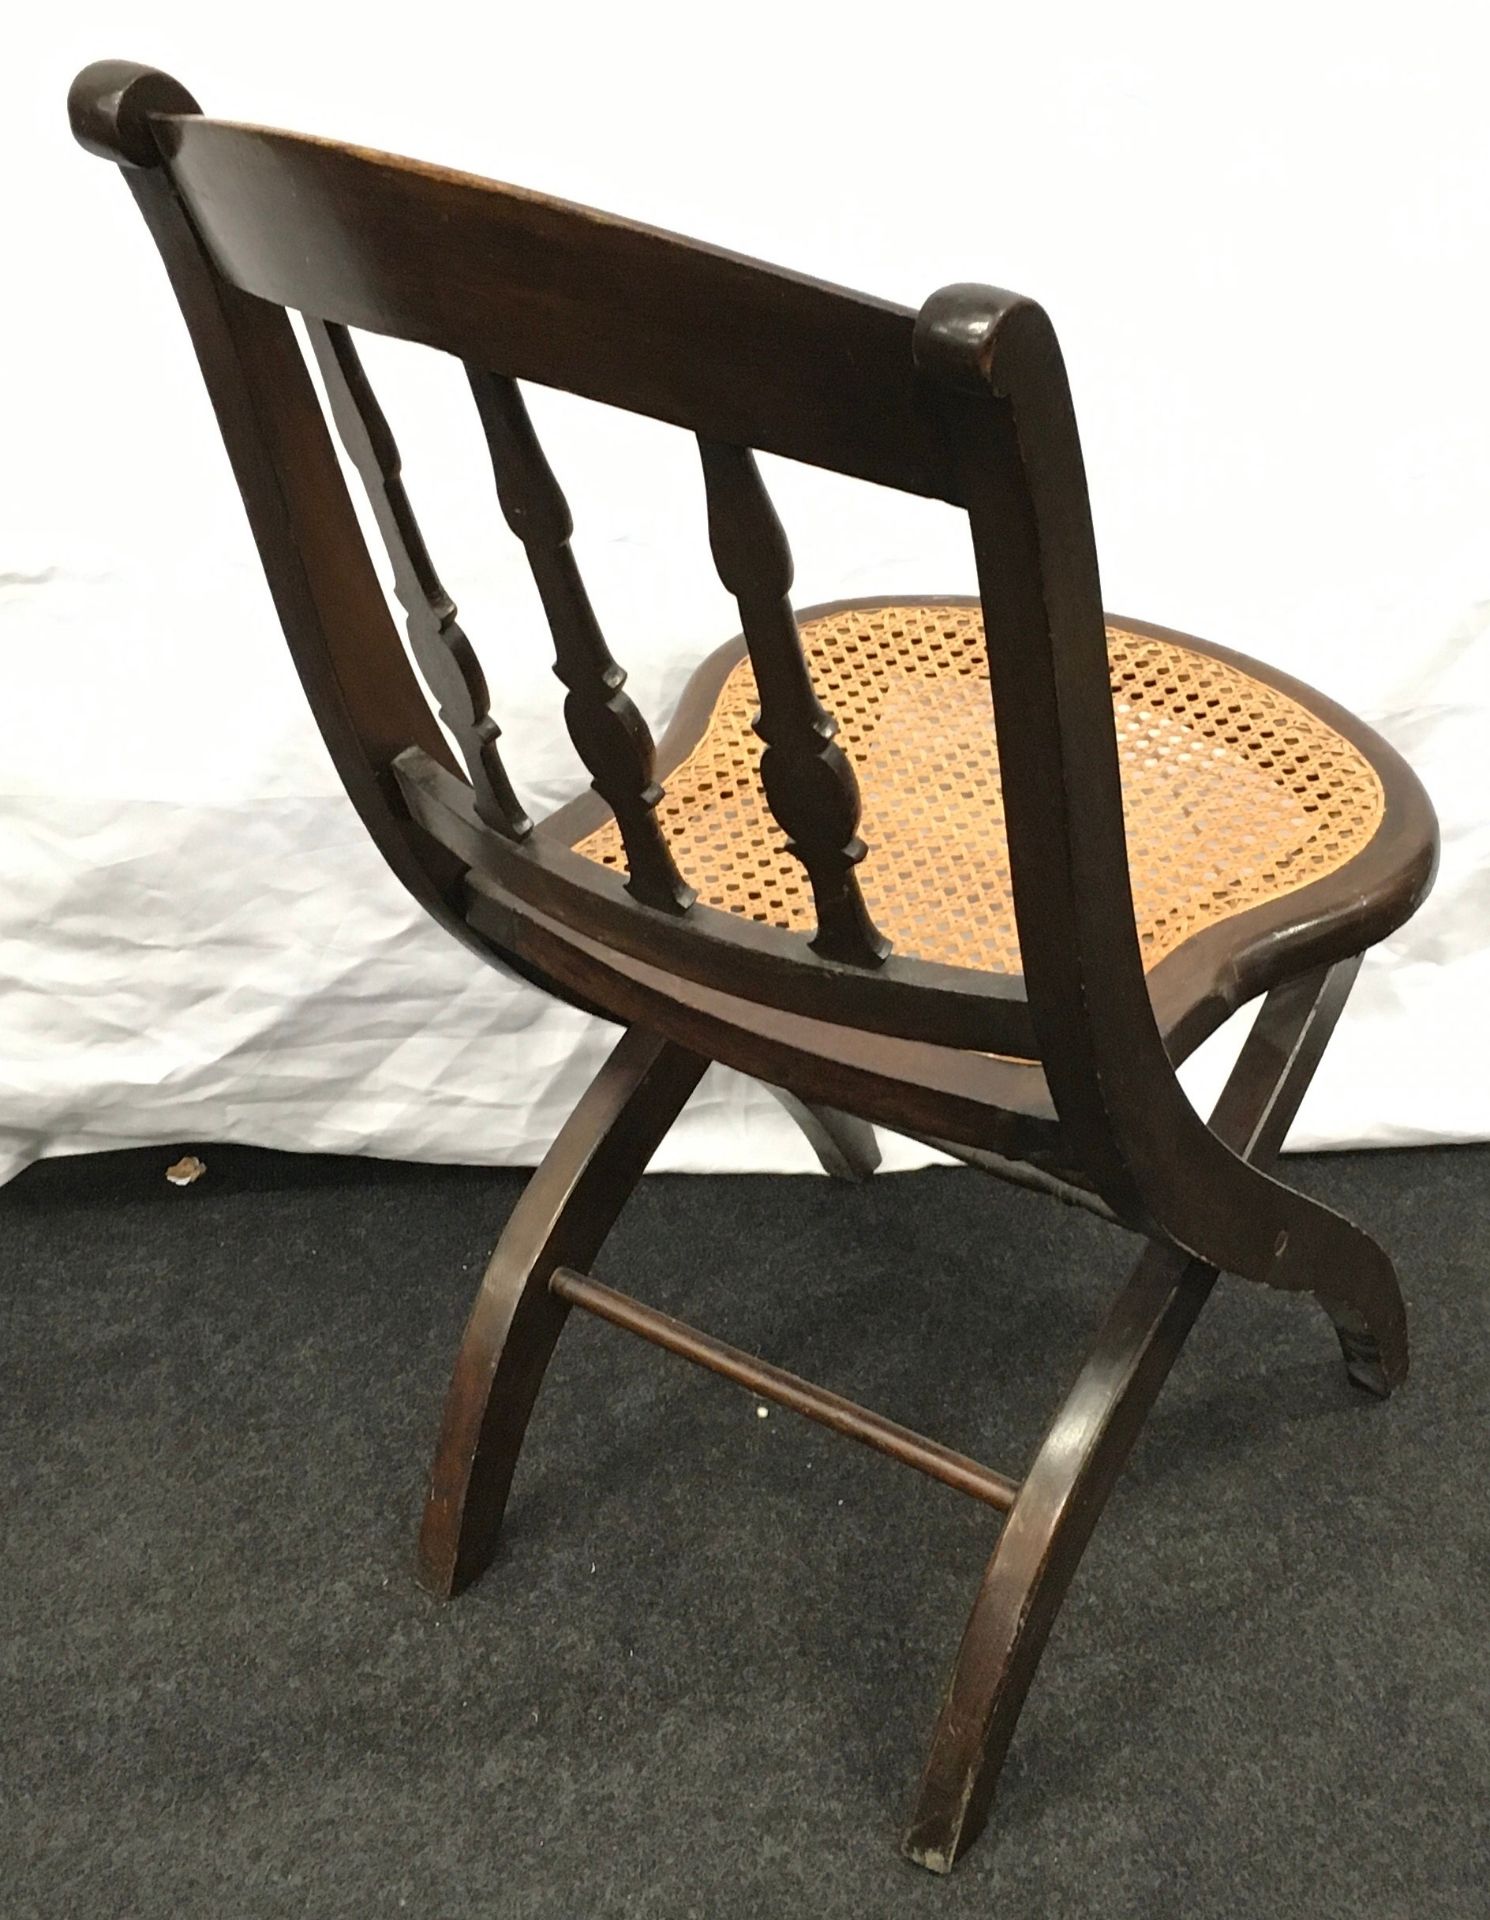 Vintage mahogany folding chair with rattan seat in good order - Image 2 of 3